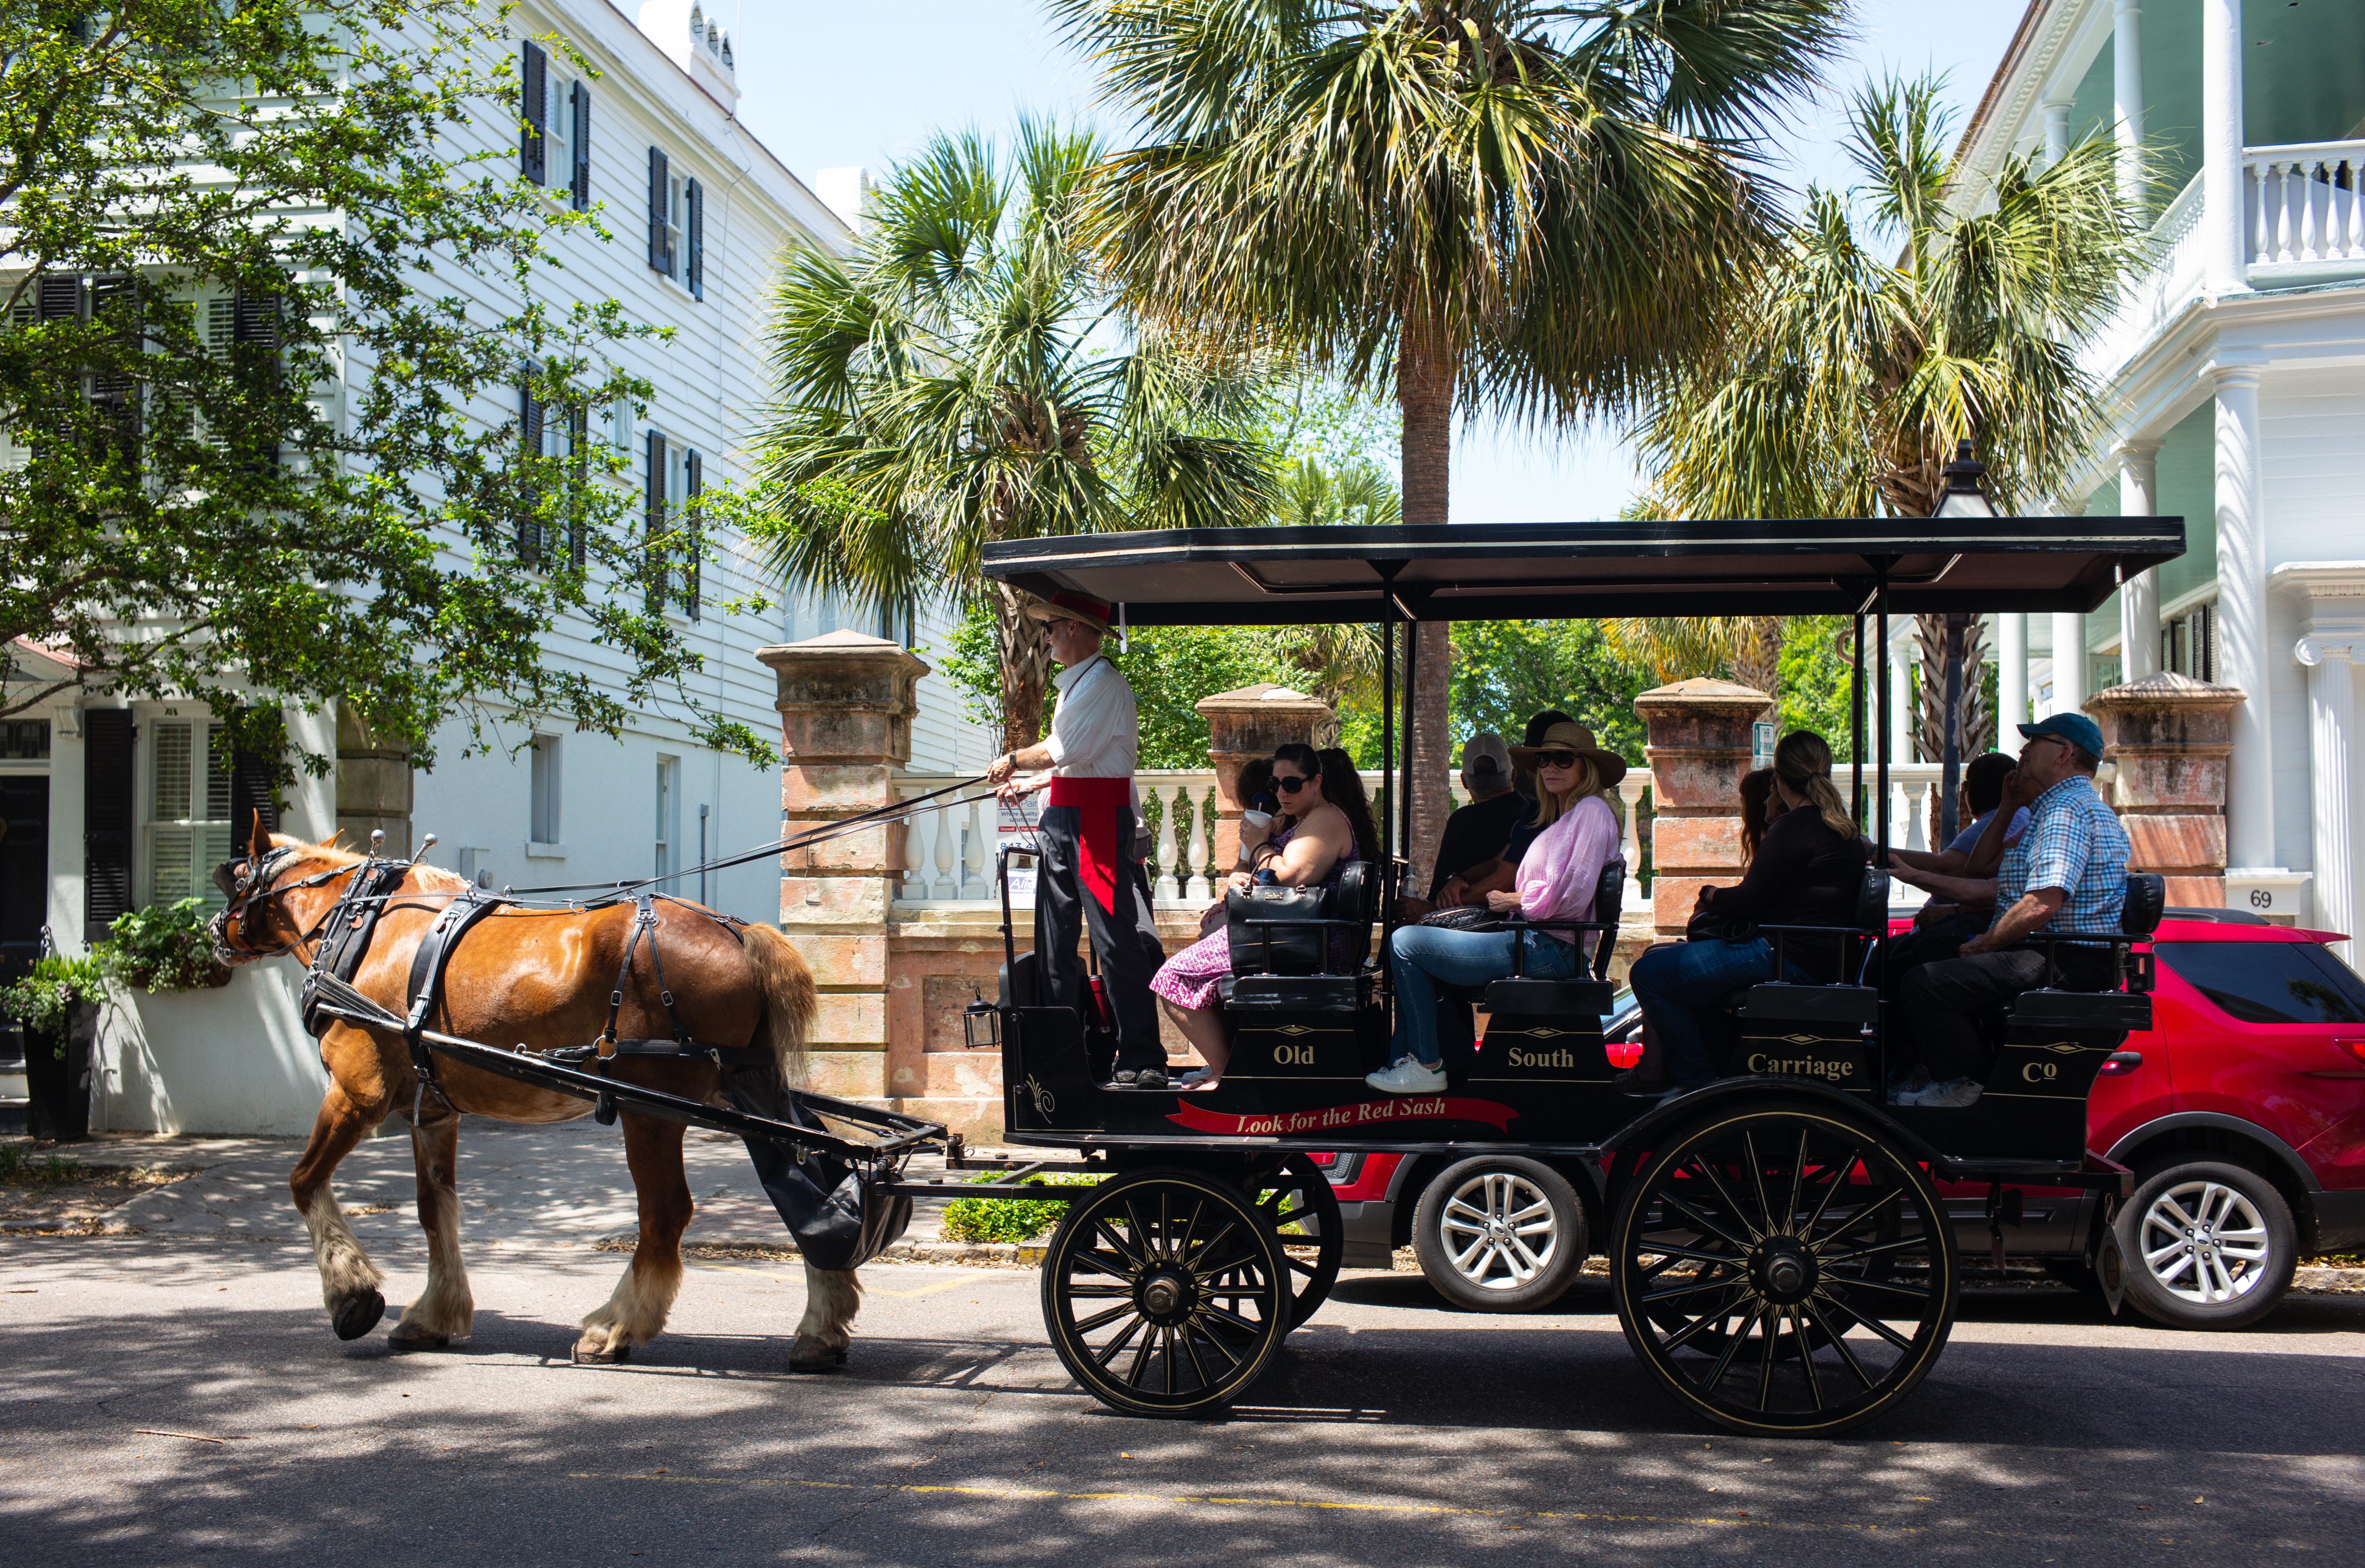 Guides lead tourists through streets on a horse drawn buggy in the historic 19th-century downtown Charleston, South Carolina on April 24, 2019. (Robert Nickelsberg/Getty)